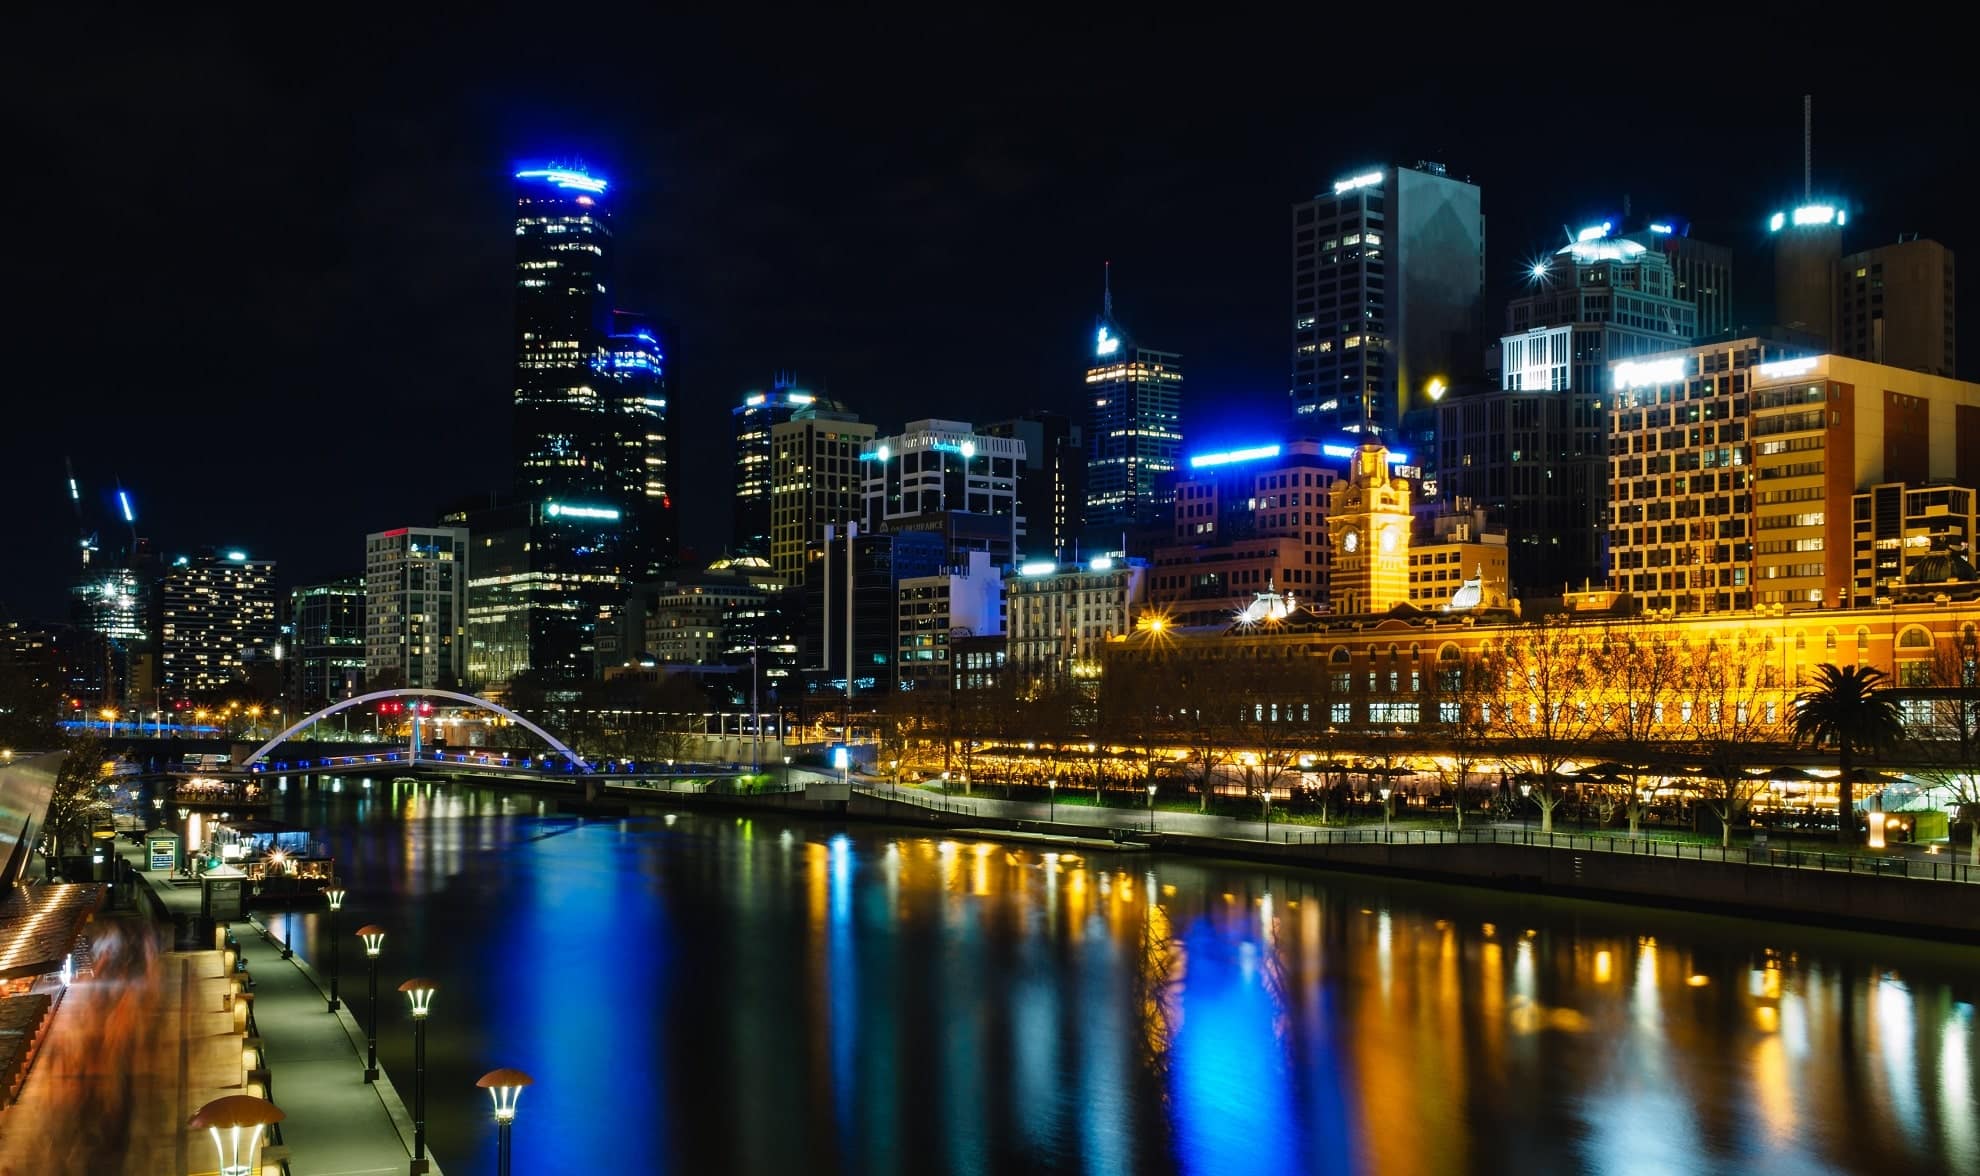 image for the australian resident for tax purposes article: city lights reflect along the yarra river in melbourne, australia